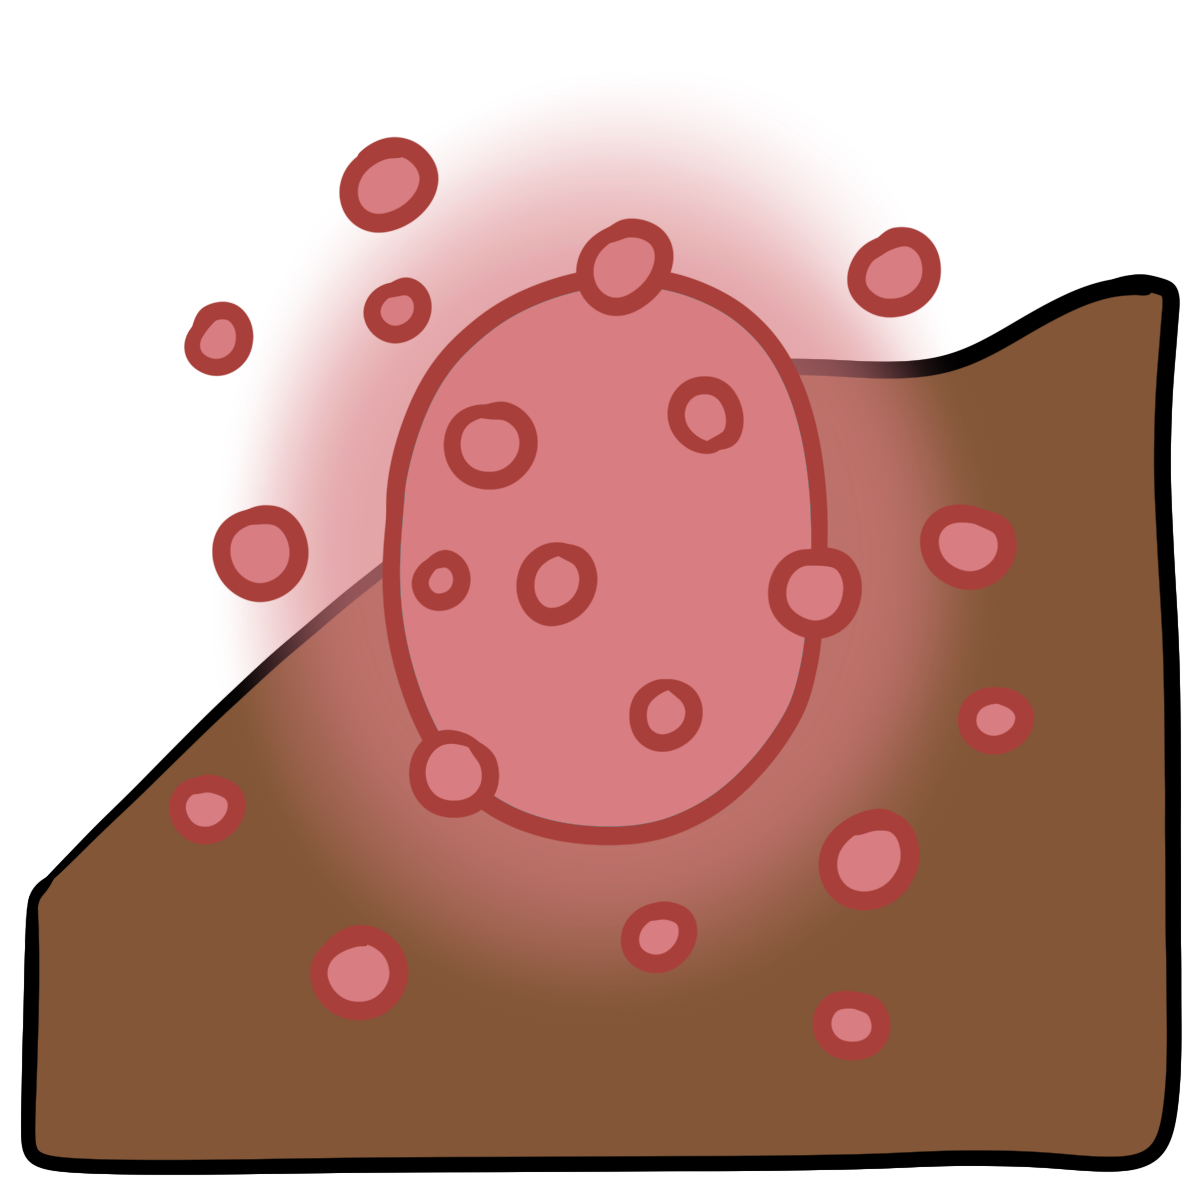 A pink glowing oval with pink dots around it. Curved medium brown skin fills the bottom half of the background.